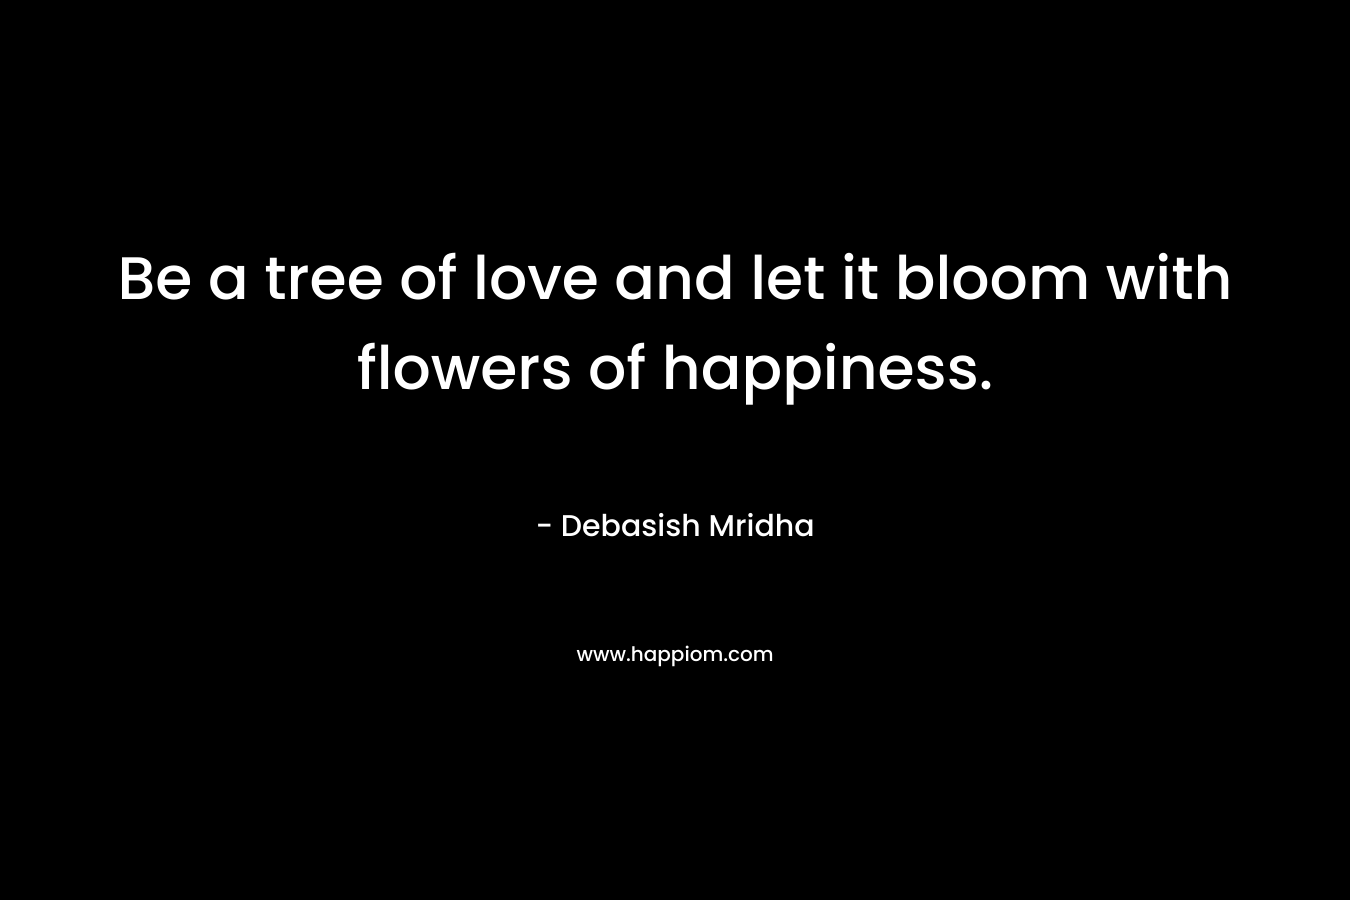 Be a tree of love and let it bloom with flowers of happiness. – Debasish Mridha